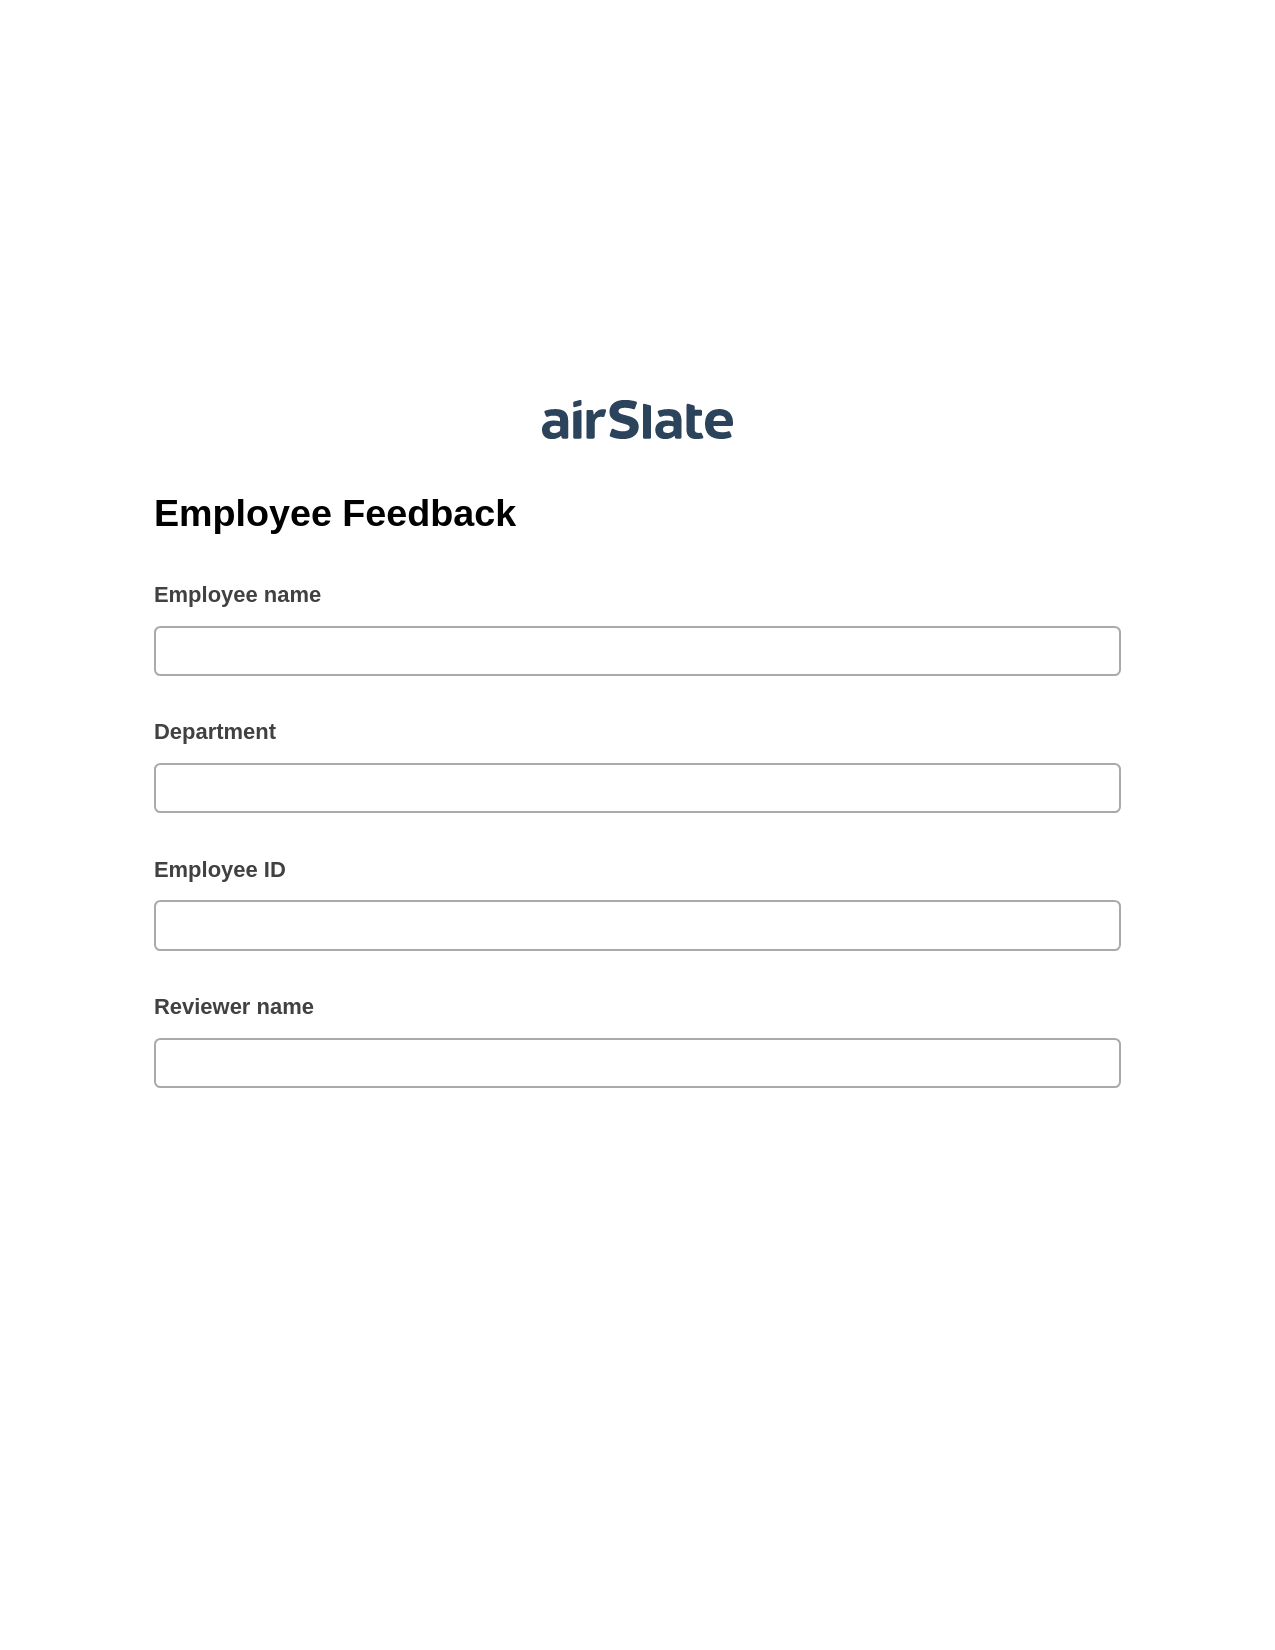 Employee Feedback Pre-fill Document Bot, In-person Signing Bot, Archive to SharePoint Folder Bot